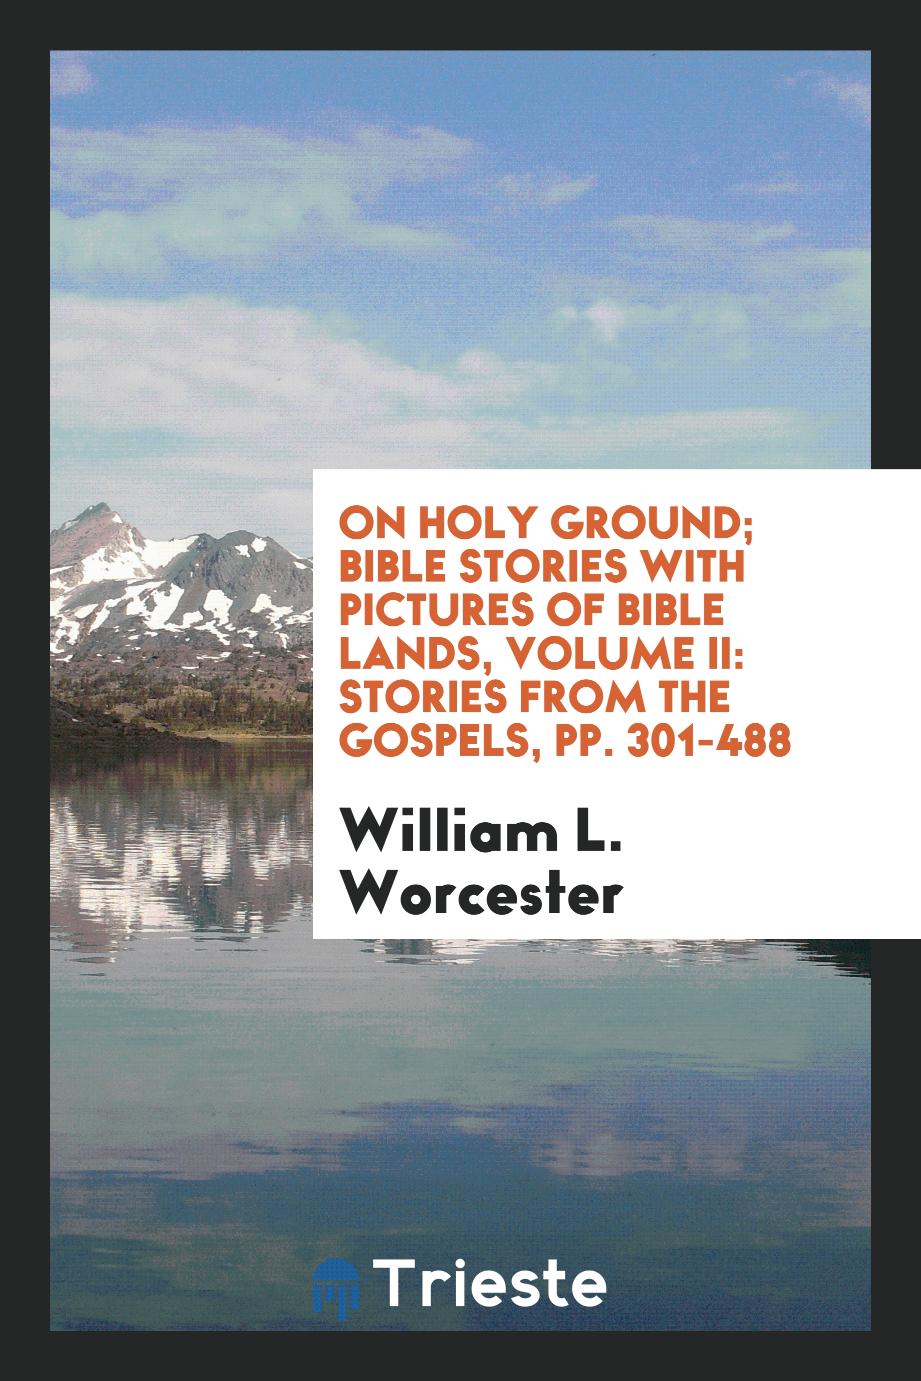 On Holy Ground; Bible Stories with Pictures of Bible Lands, Volume II: Stories from the Gospels, pp. 301-488